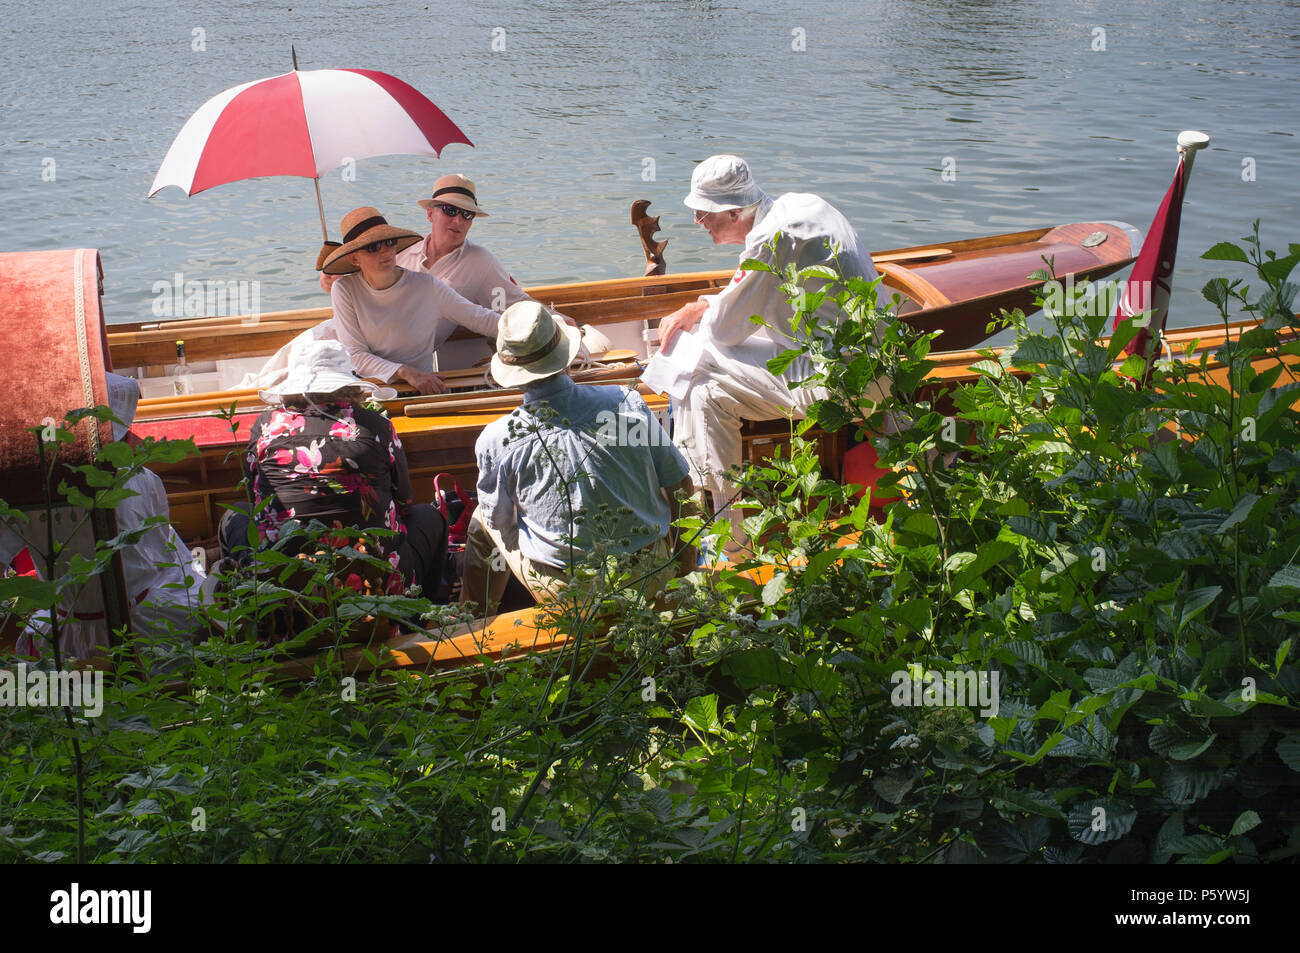 Party in their traditional vintage boats by the towpath at Henley Royal Regatta, Oxfordshire, UK Stock Photo